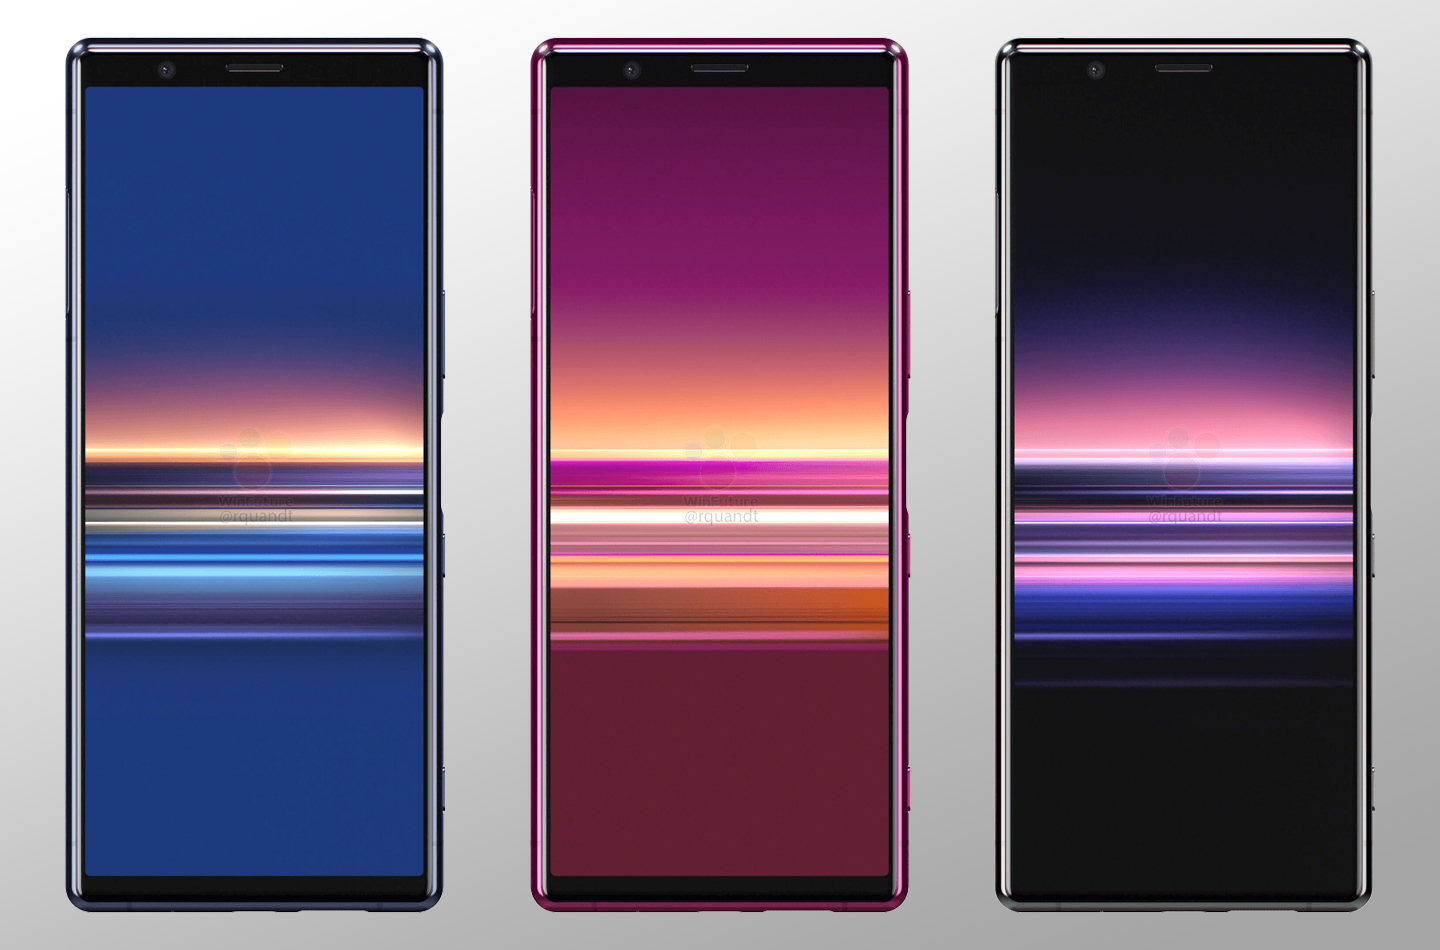 Sony Xperia 1 compact